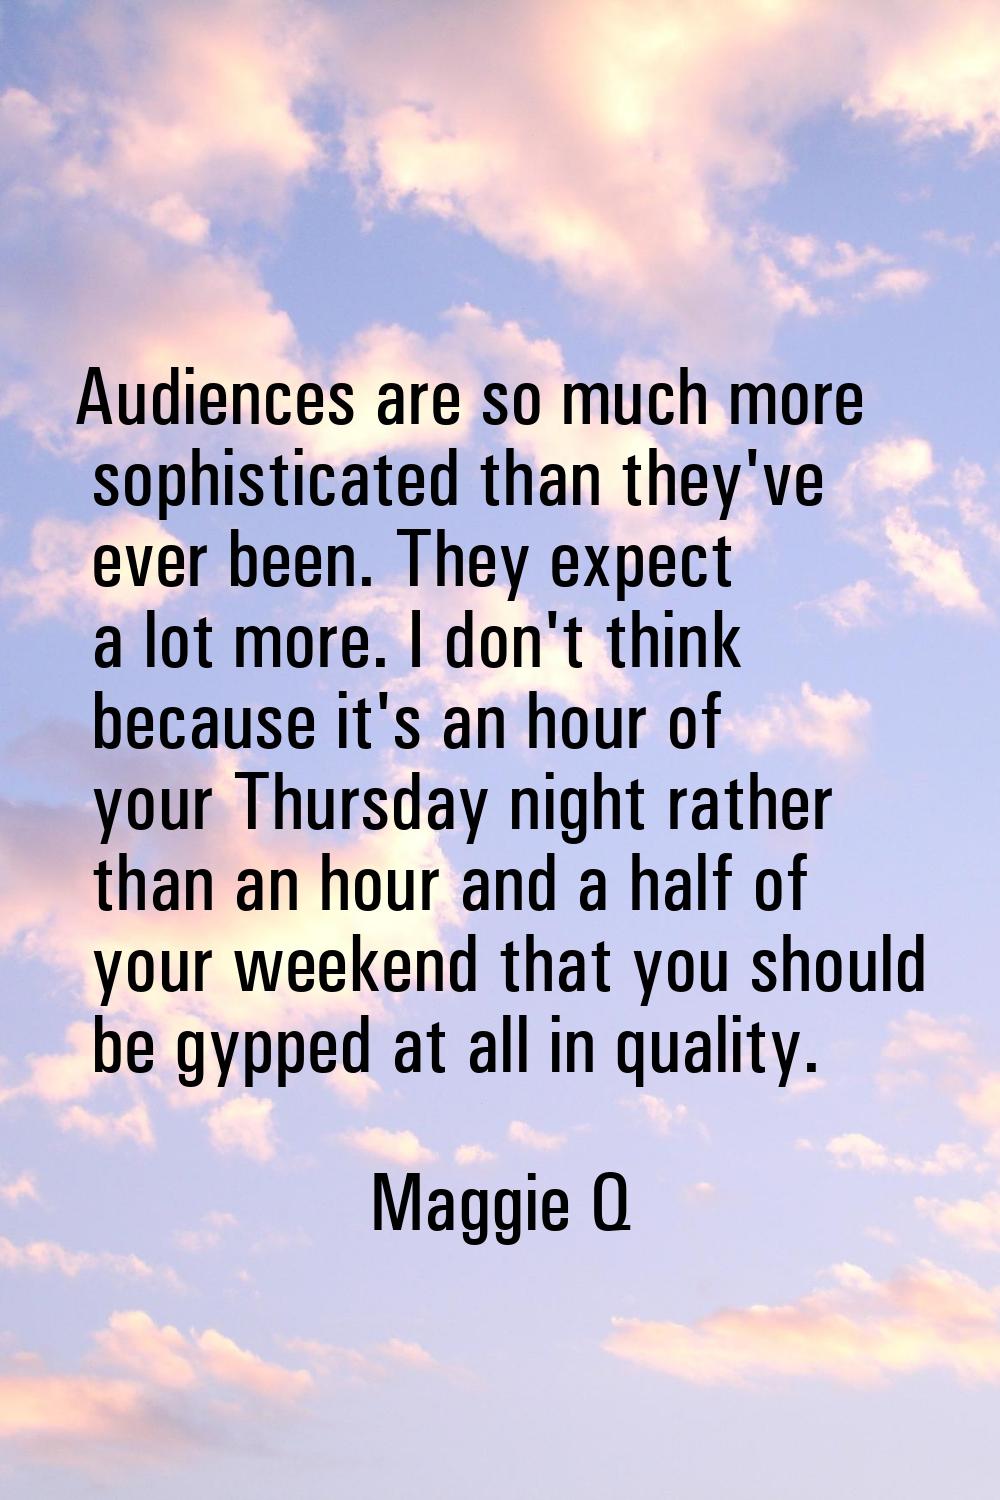 Audiences are so much more sophisticated than they've ever been. They expect a lot more. I don't th